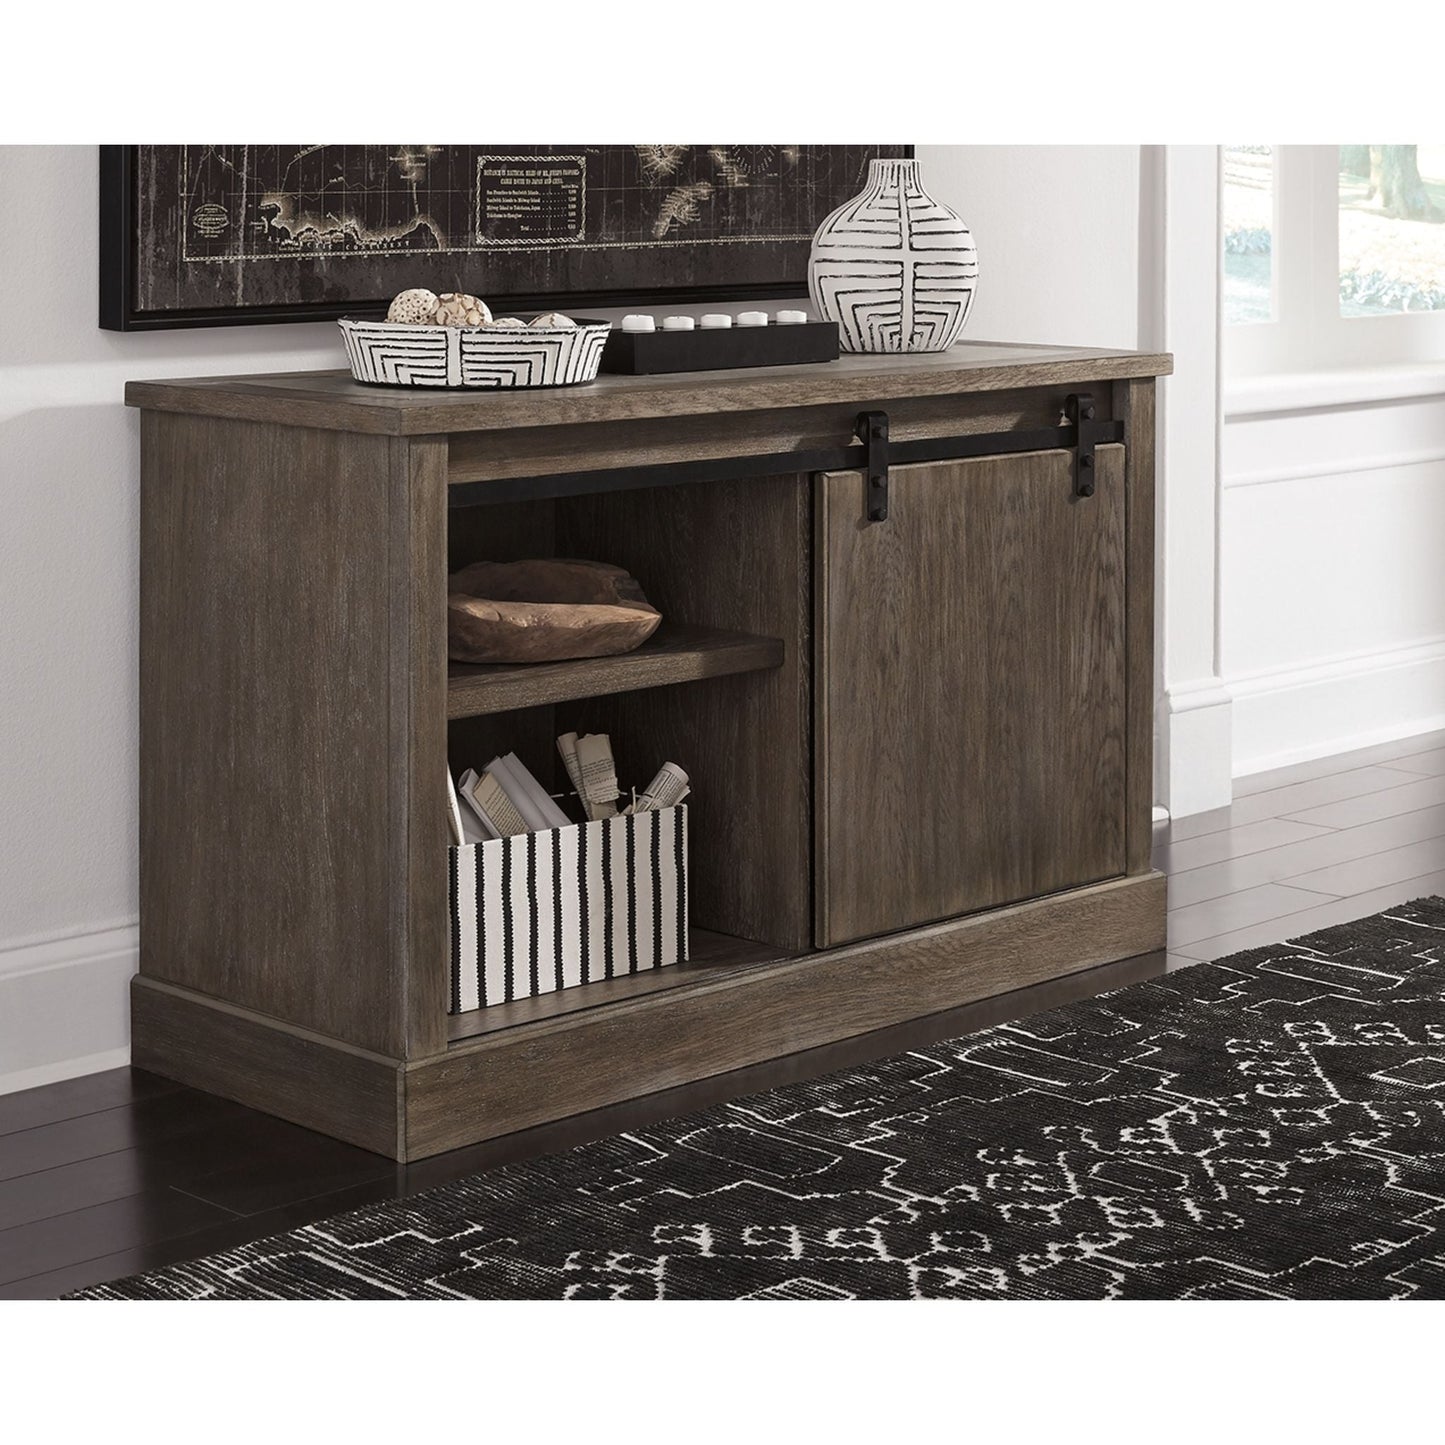 Luxenford Large Credenza - Grayish Brown